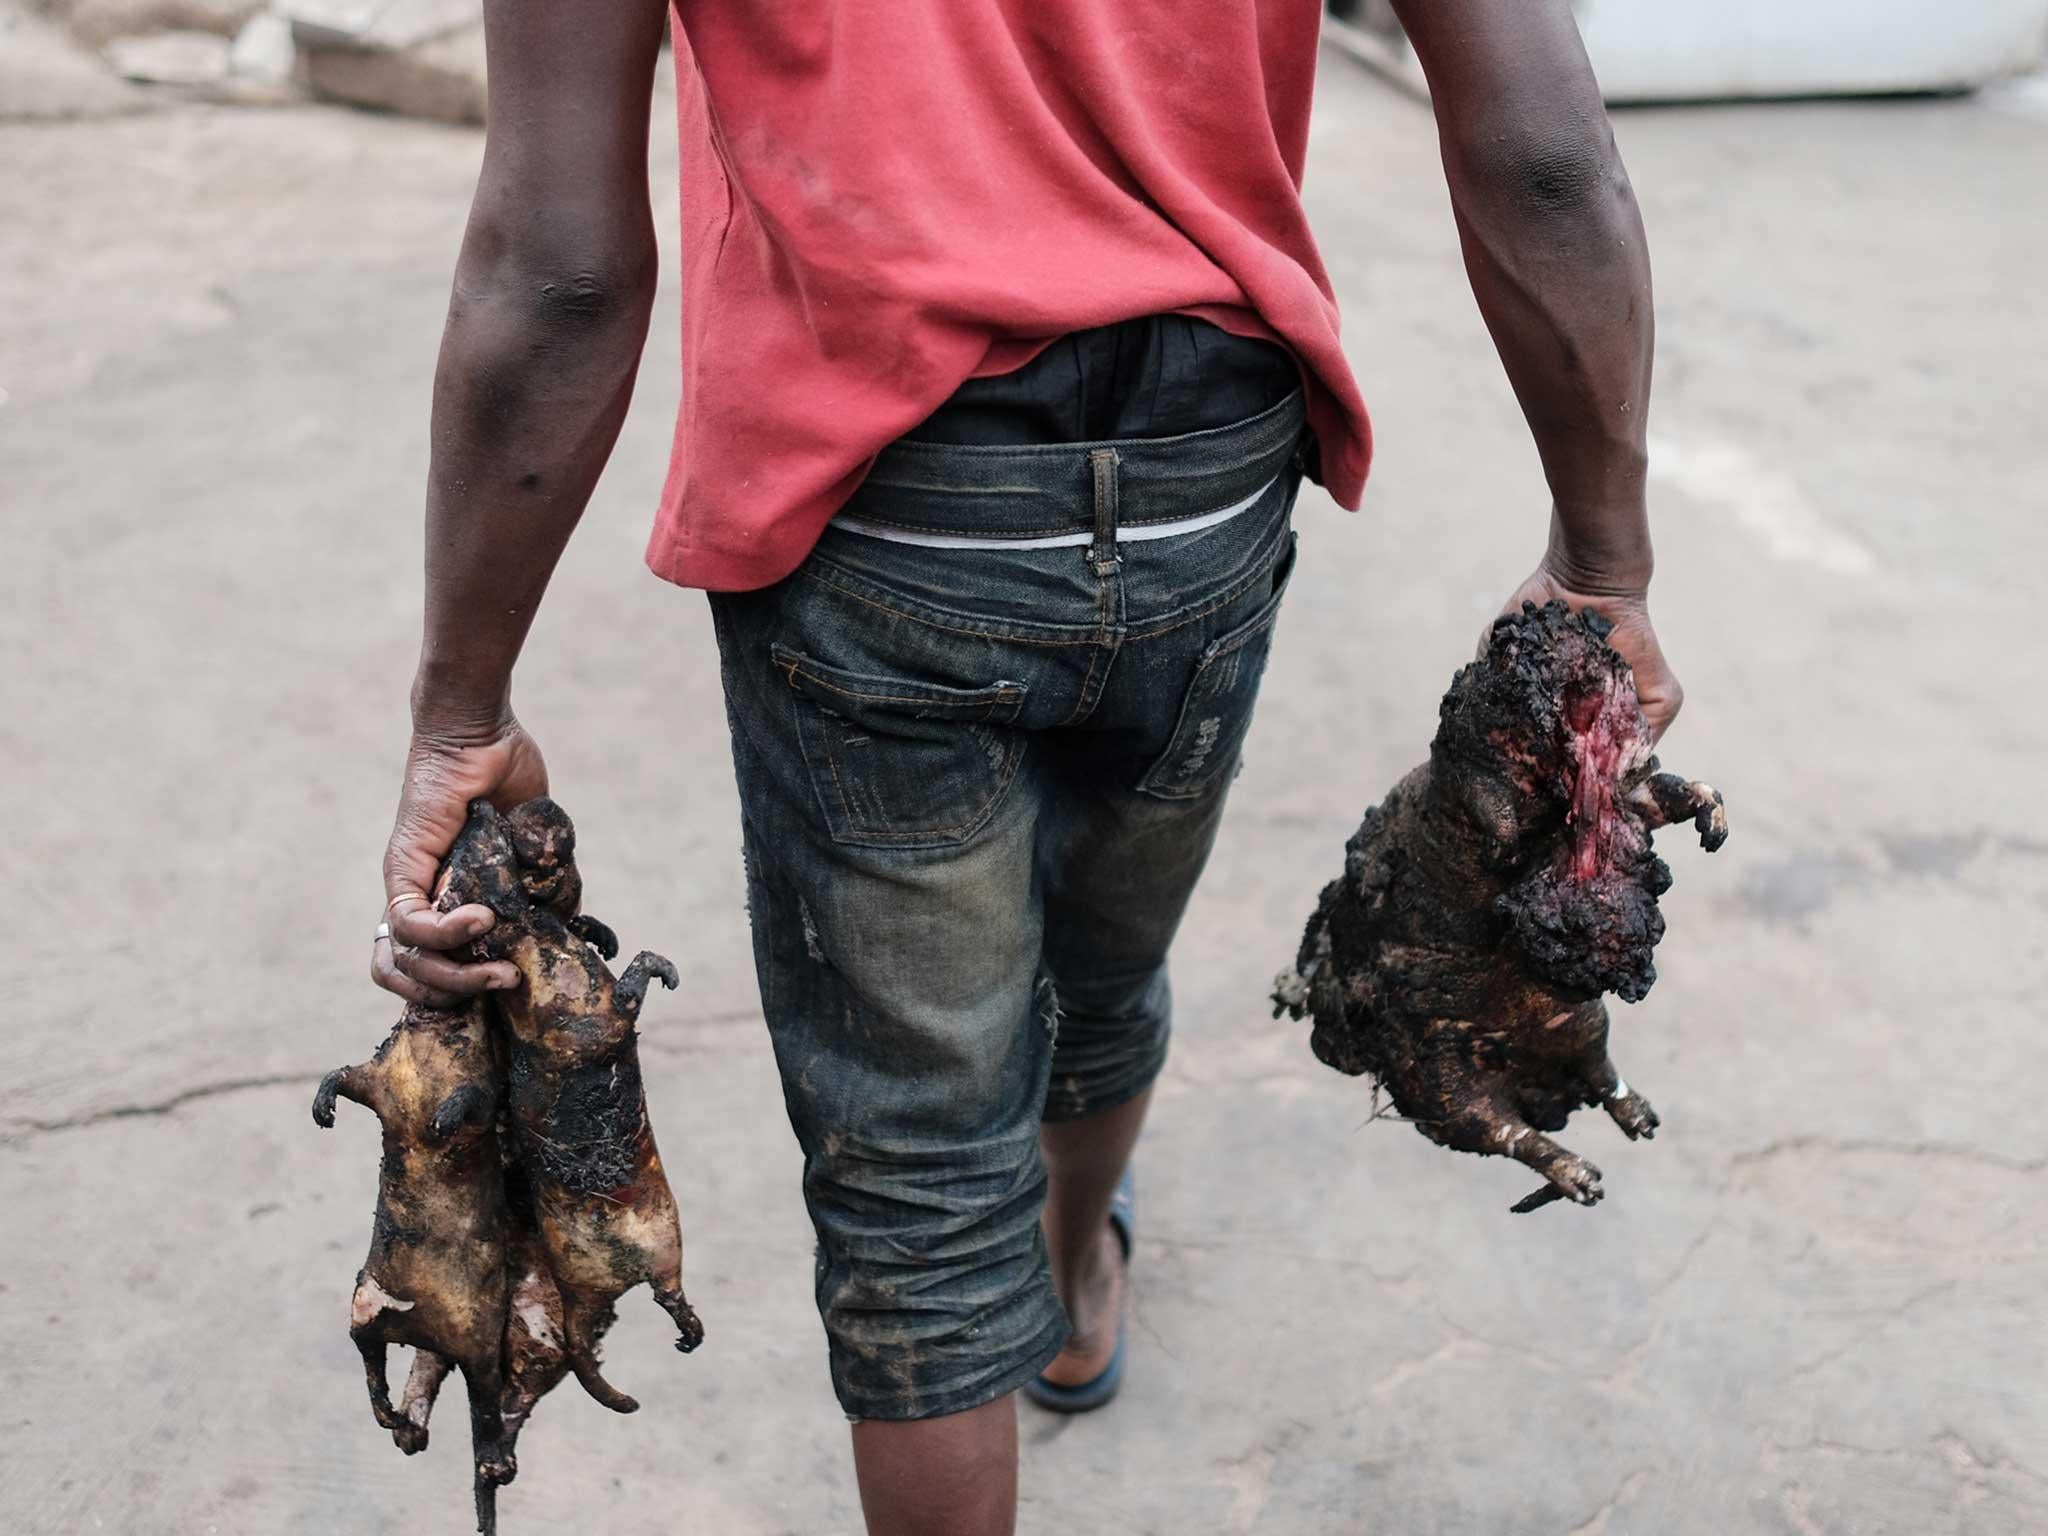 An abattoir worker carries giant rats and a grasscutter, their fur singed over an open fire and scraped off the carcasses with a machete